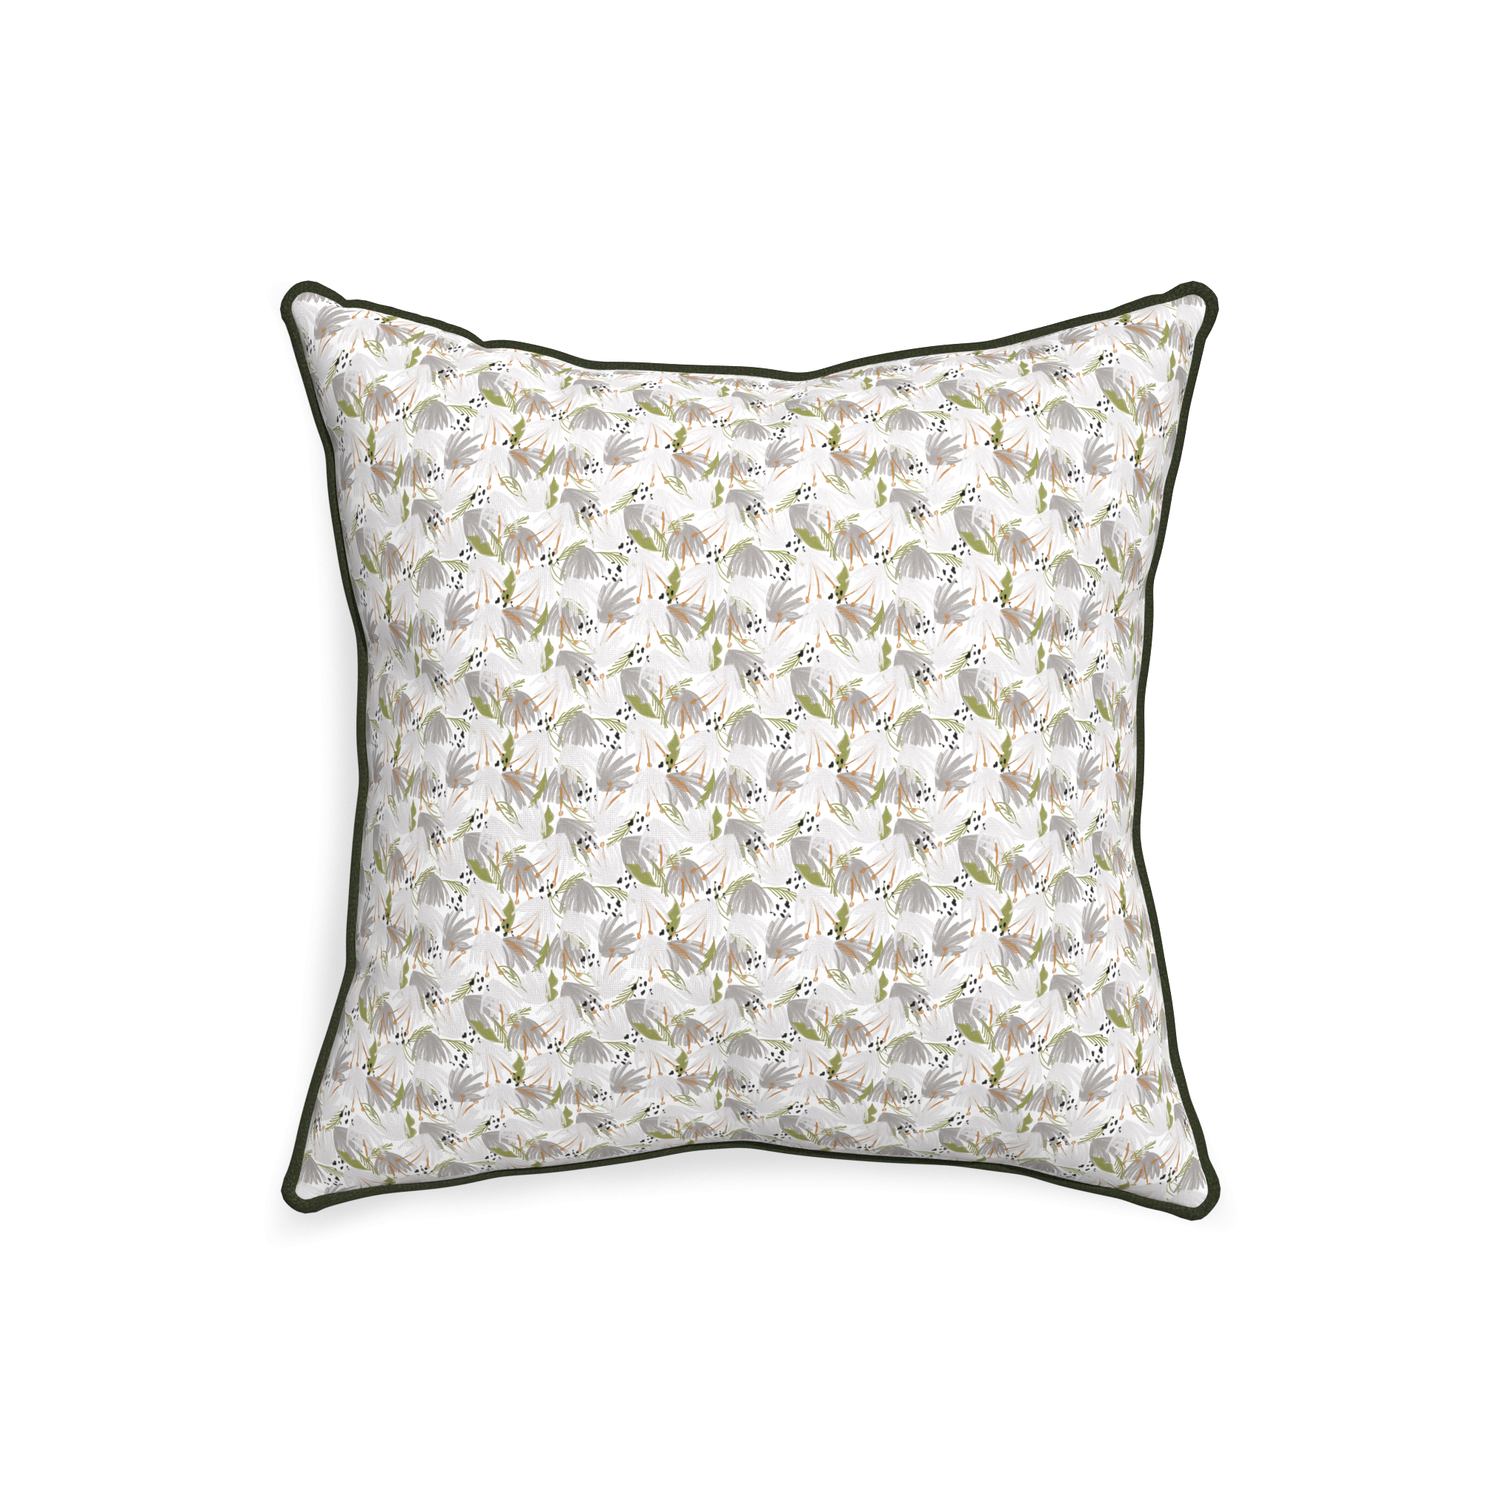 20-square eden grey custom grey floralpillow with f piping on white background